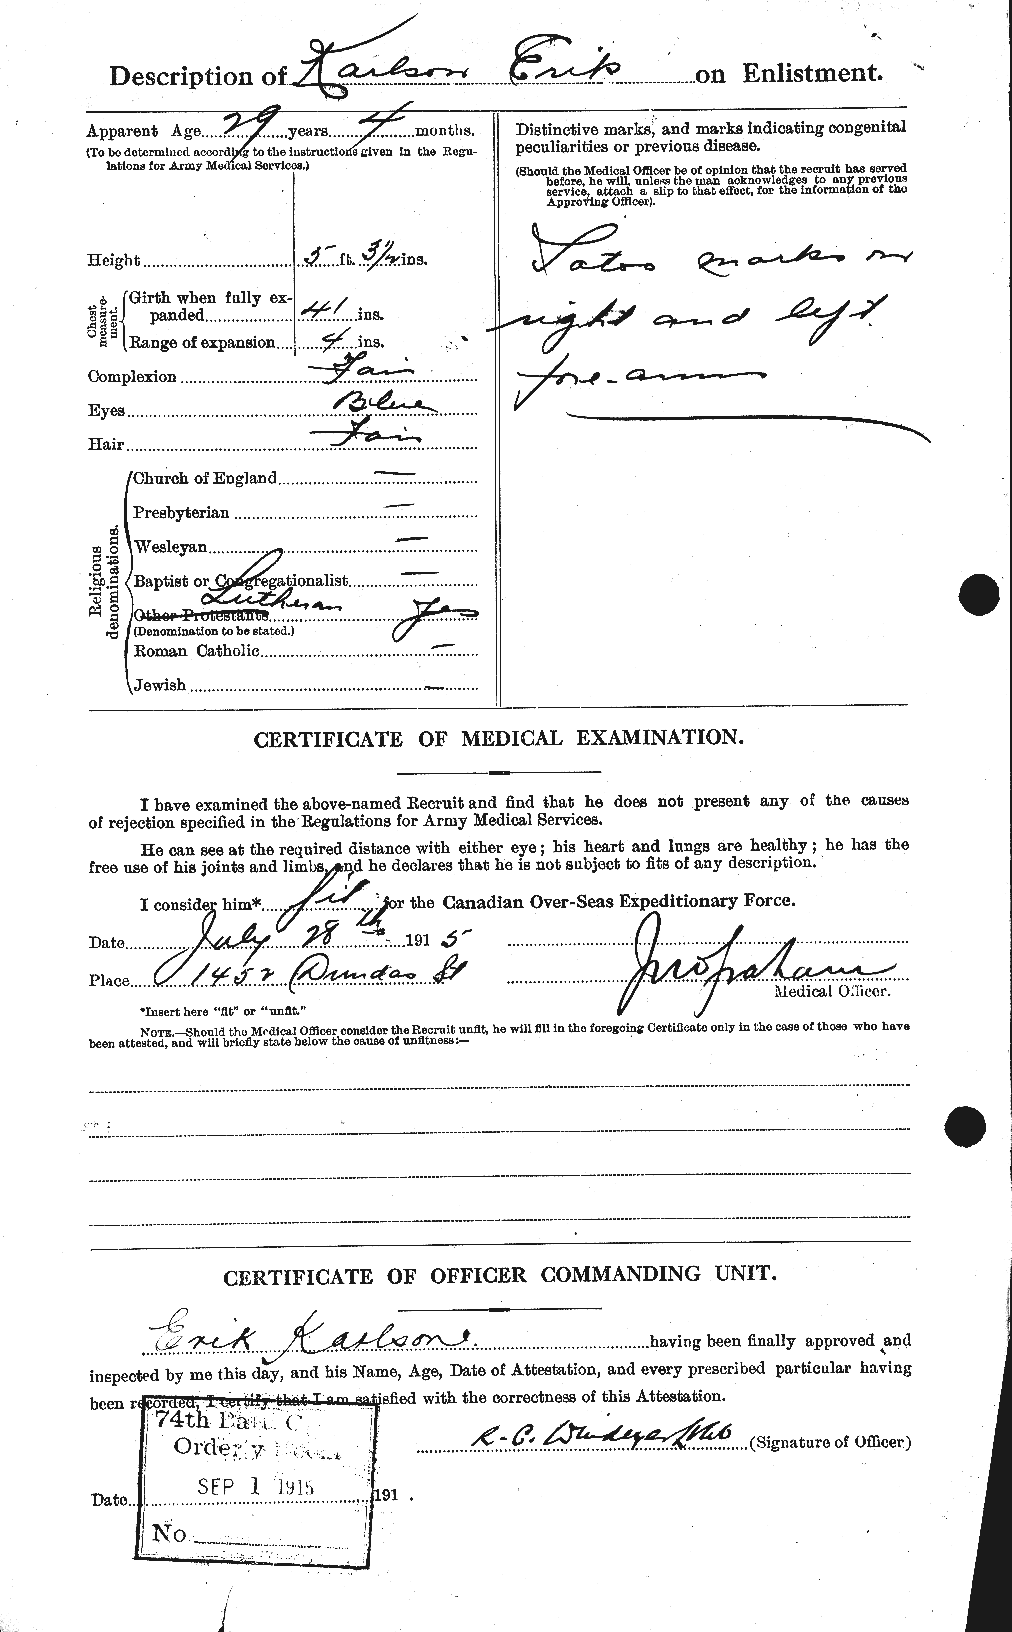 Personnel Records of the First World War - CEF 424052b